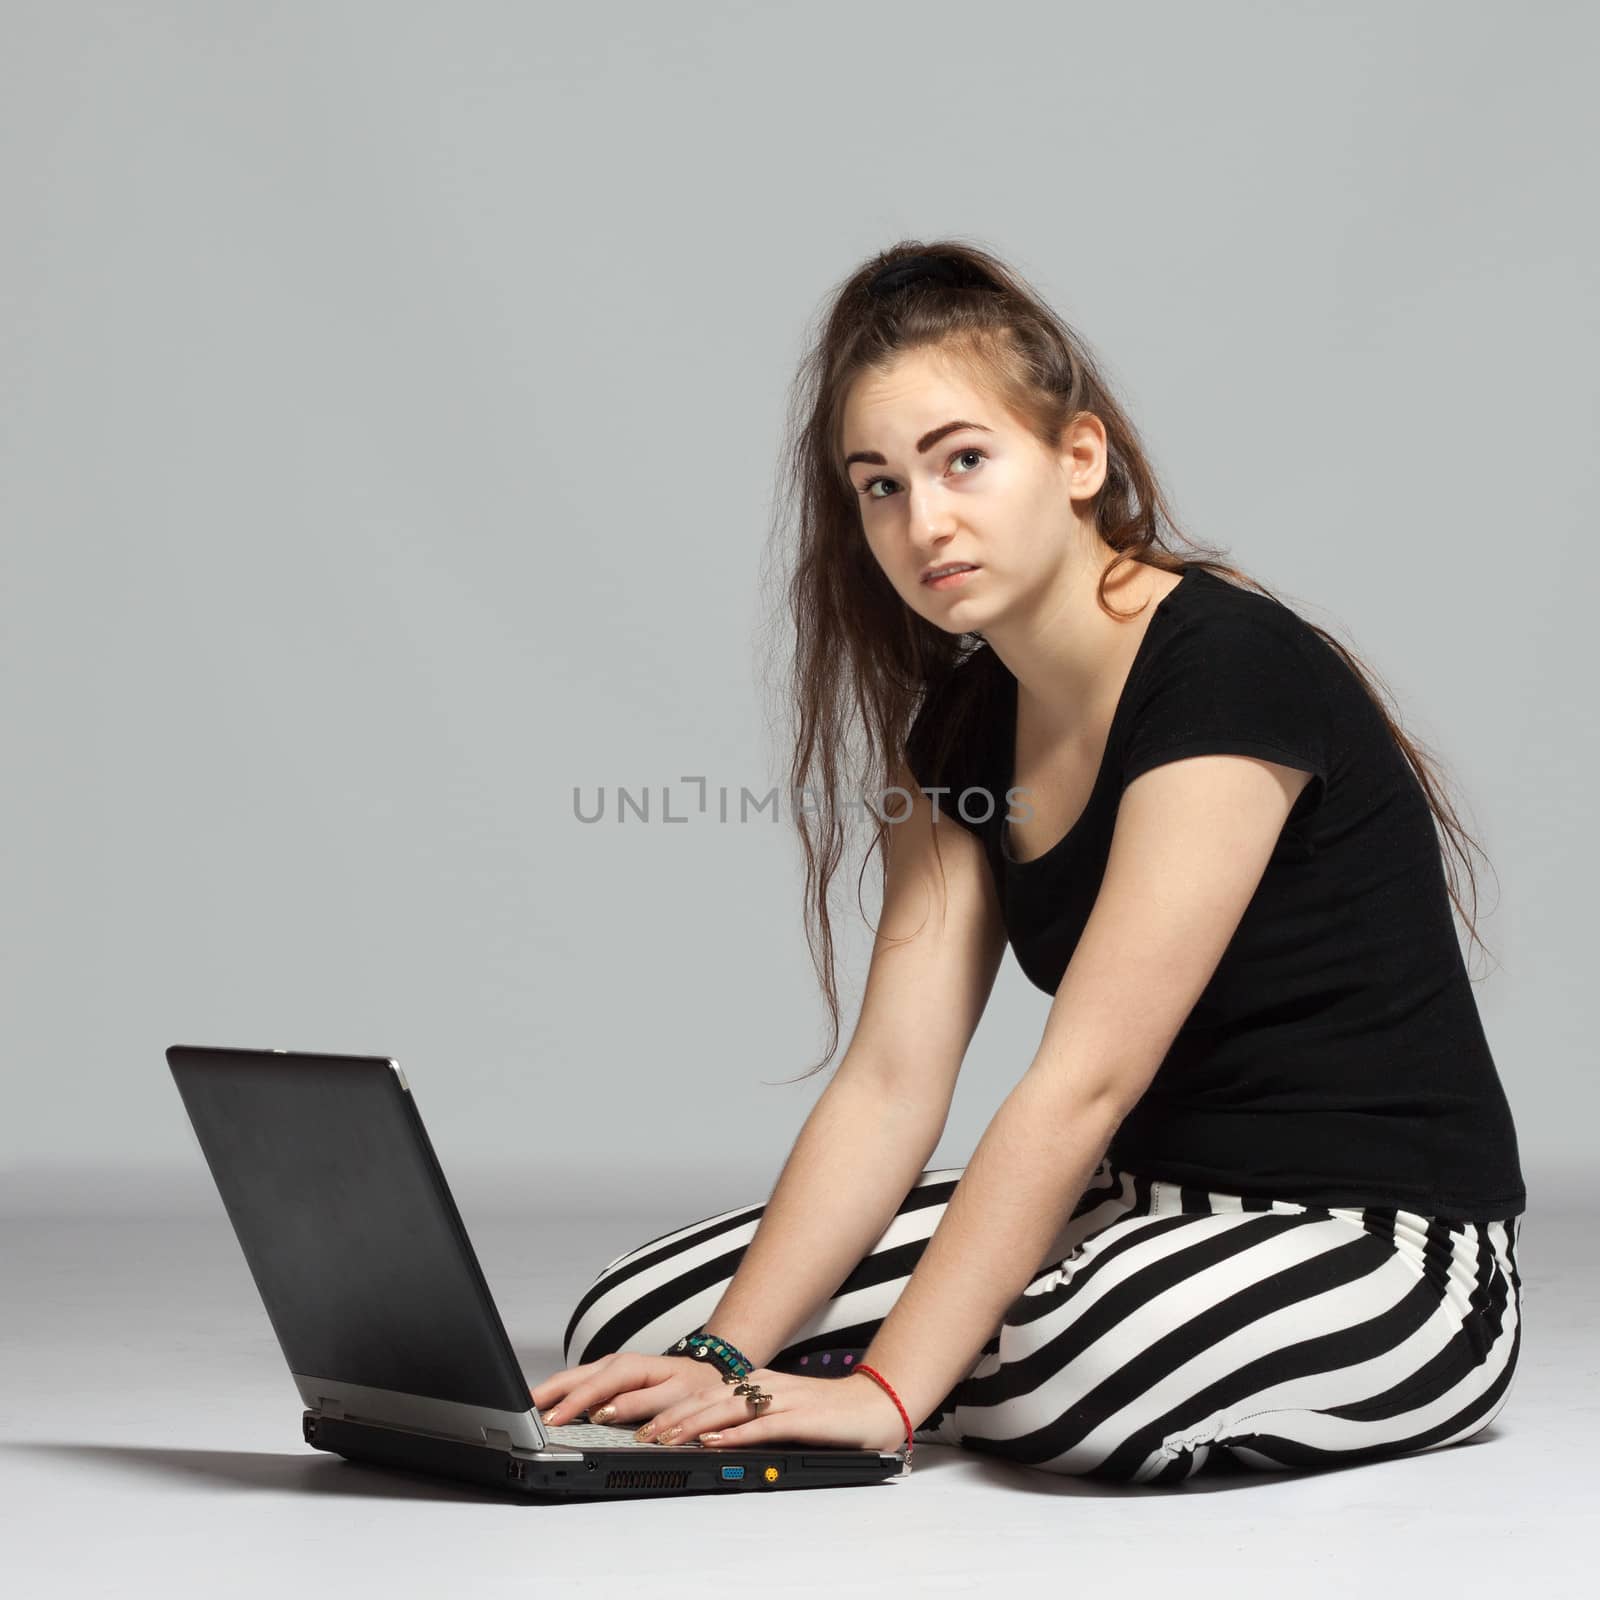 Teenager girl with laptop by maros_b